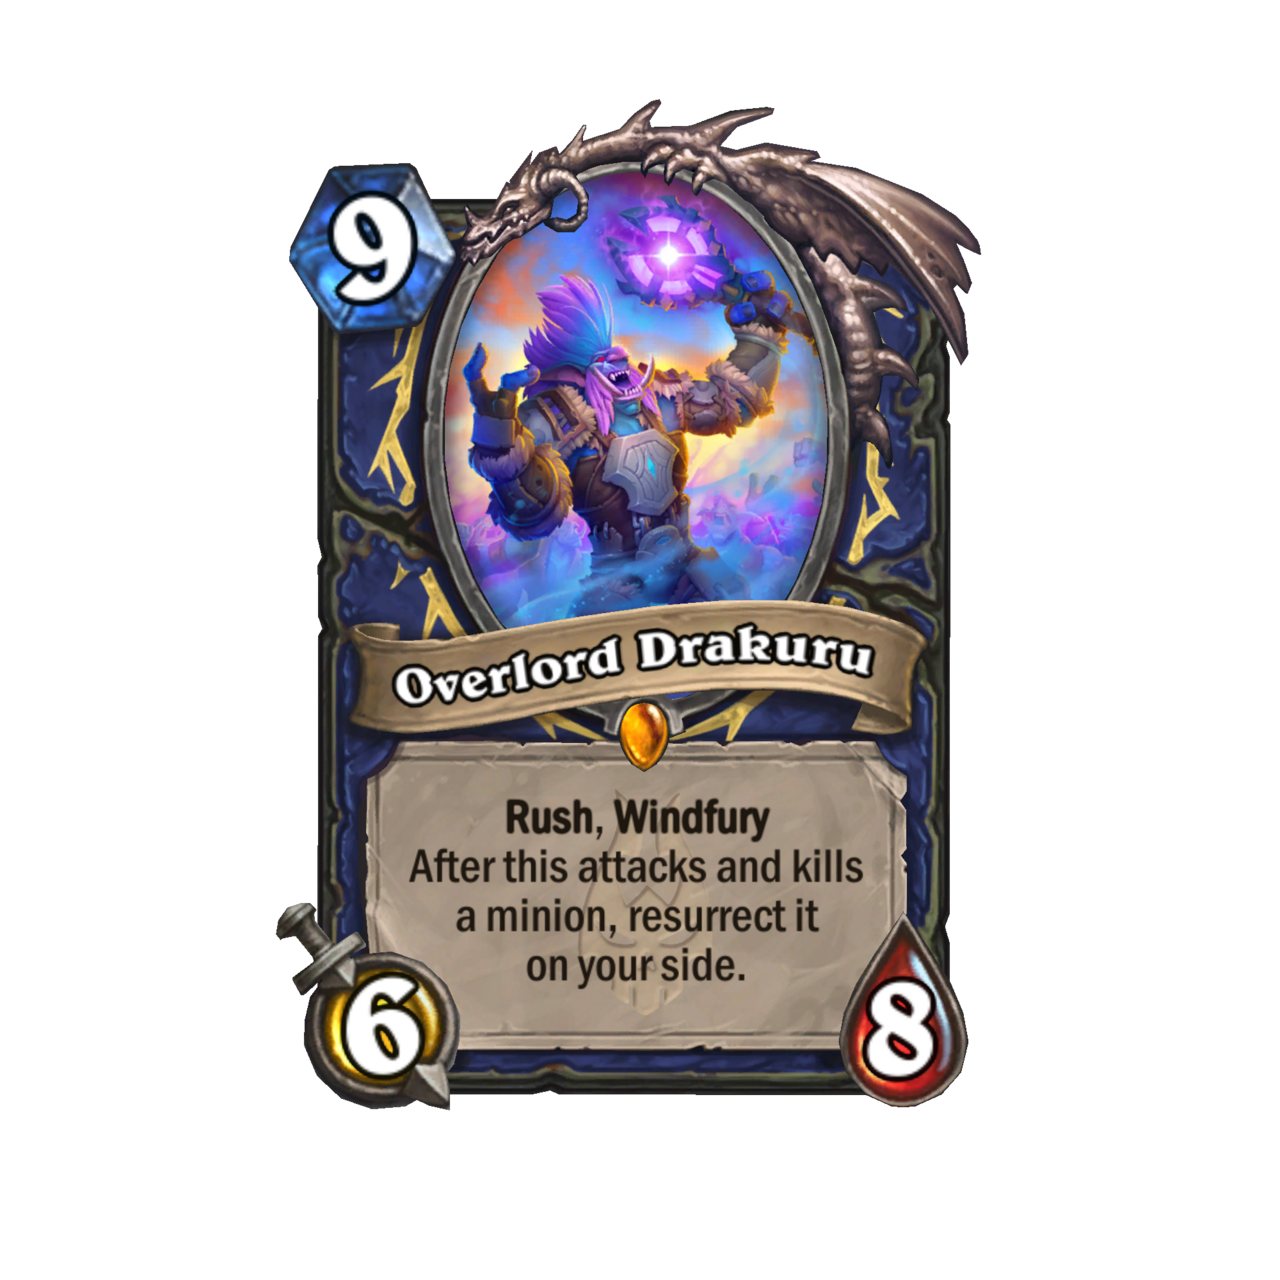 Overlord Drakuru - Rush, Windfury. After this attacks and kills a minion, resurrect it on your side.